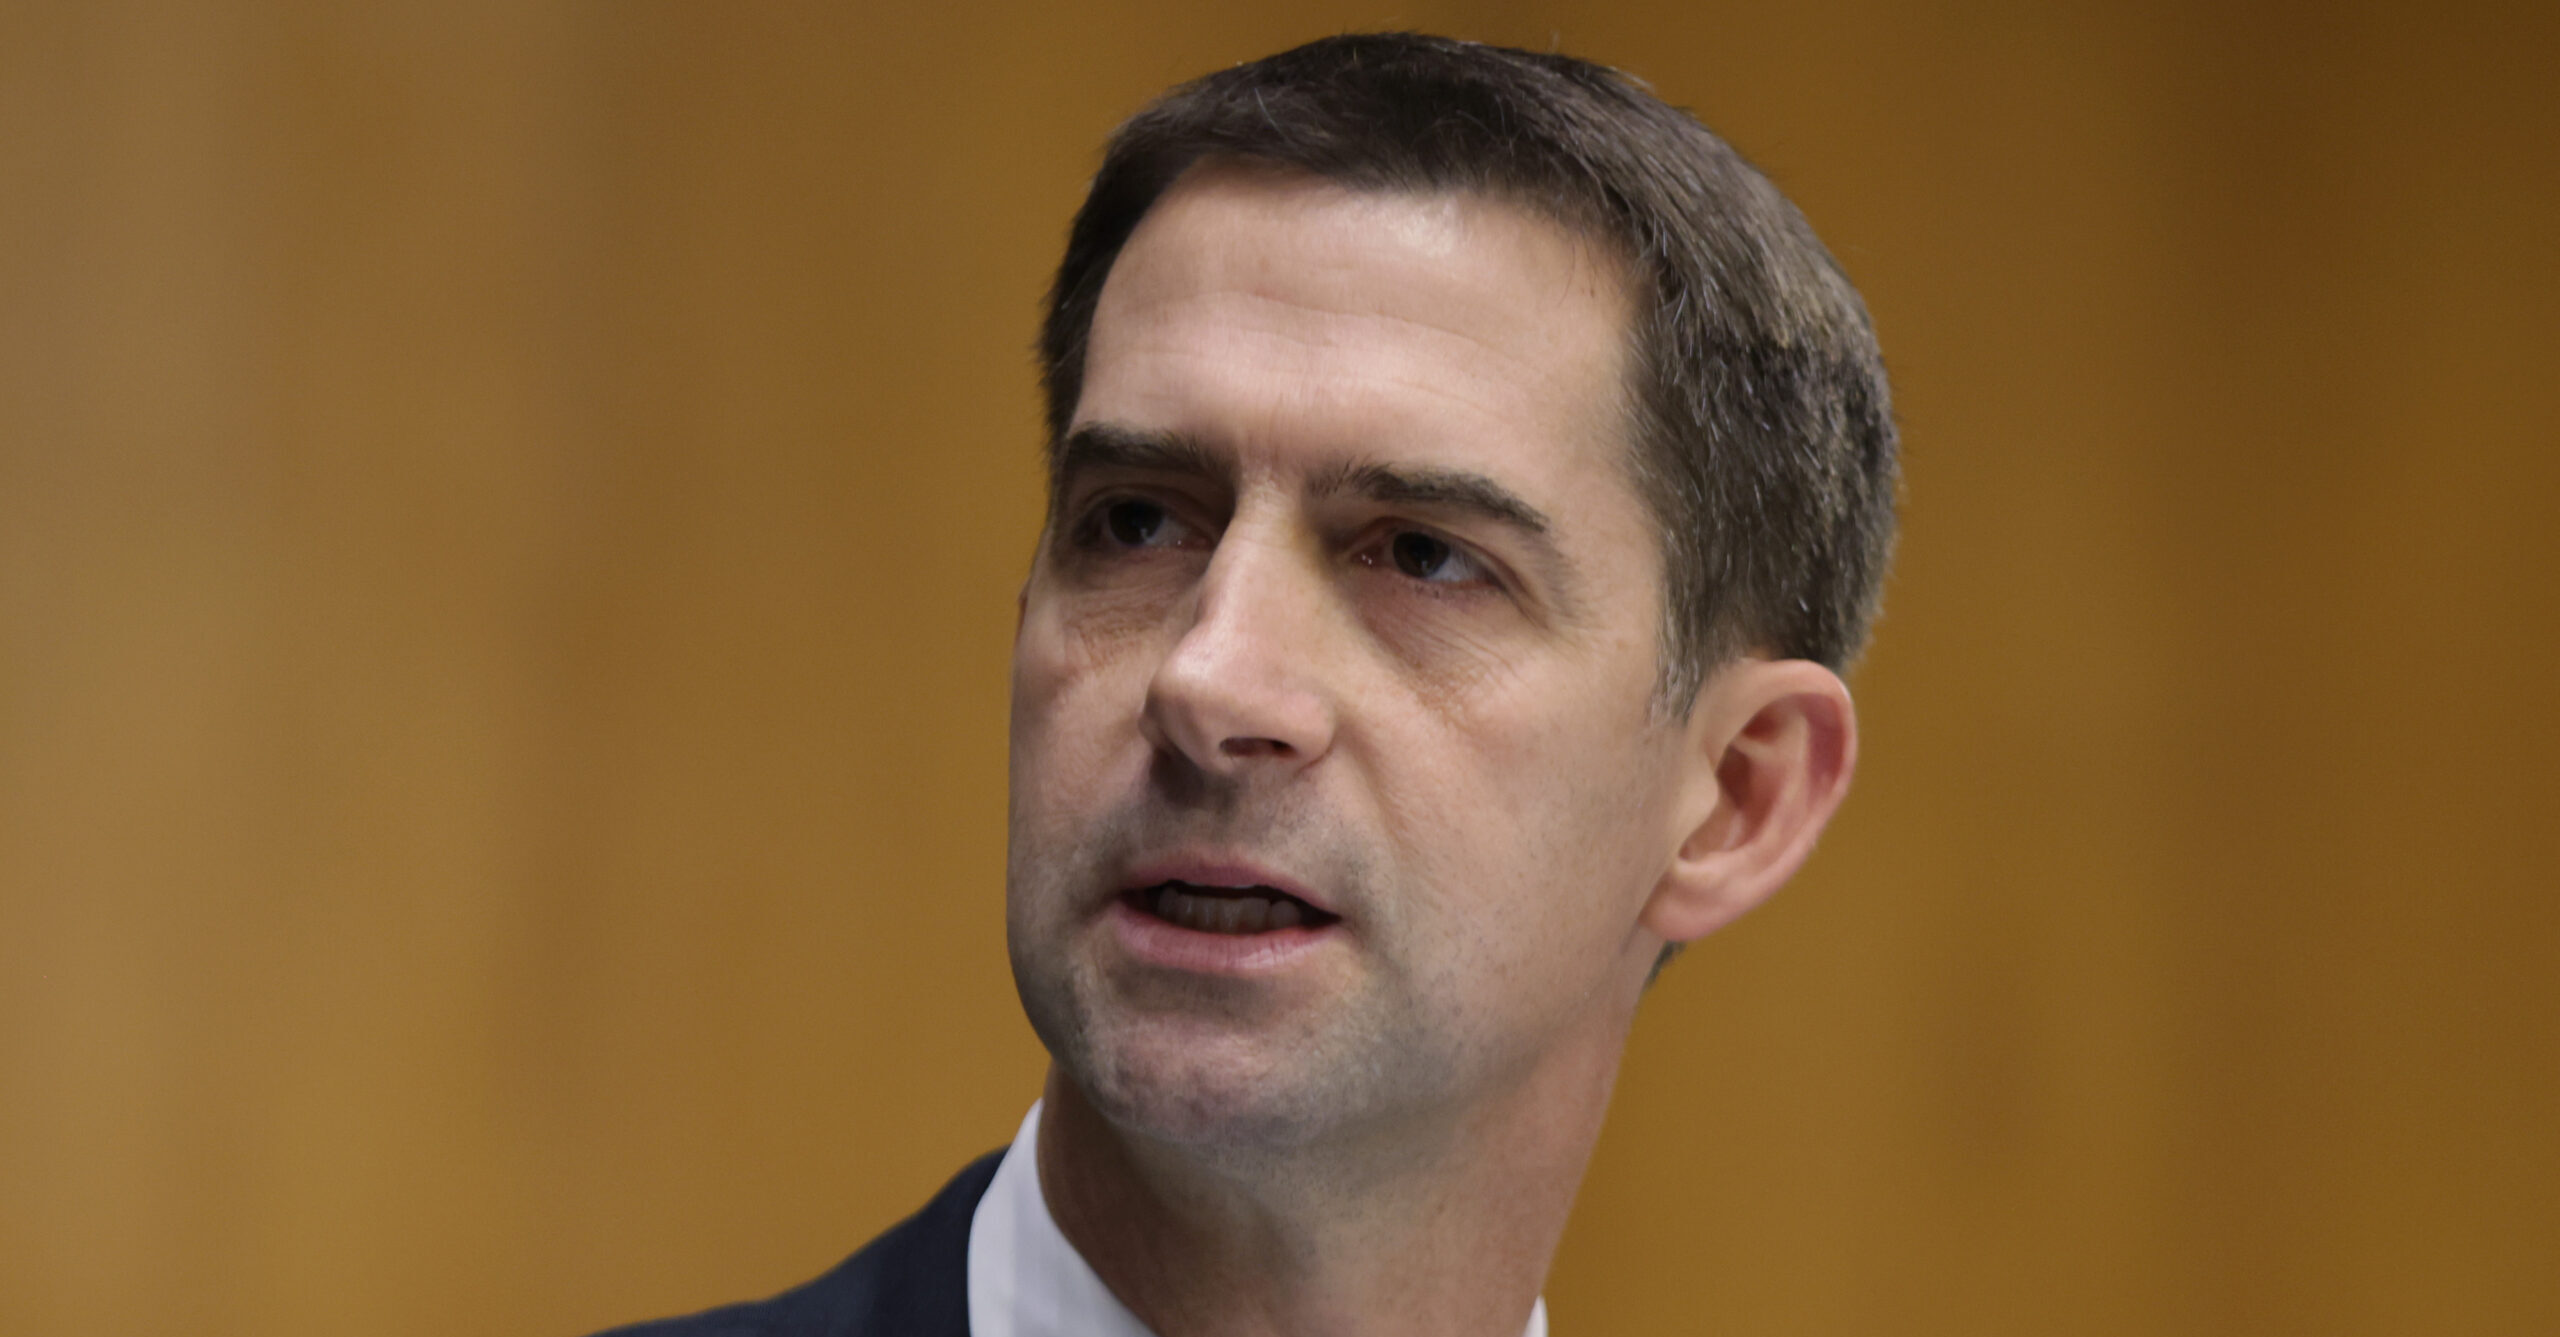 ‘A Scam to Rig Elections’: Tom Cotton Attacks Ranked-Choice Voting After Sarah Palin Loses to a Democrat